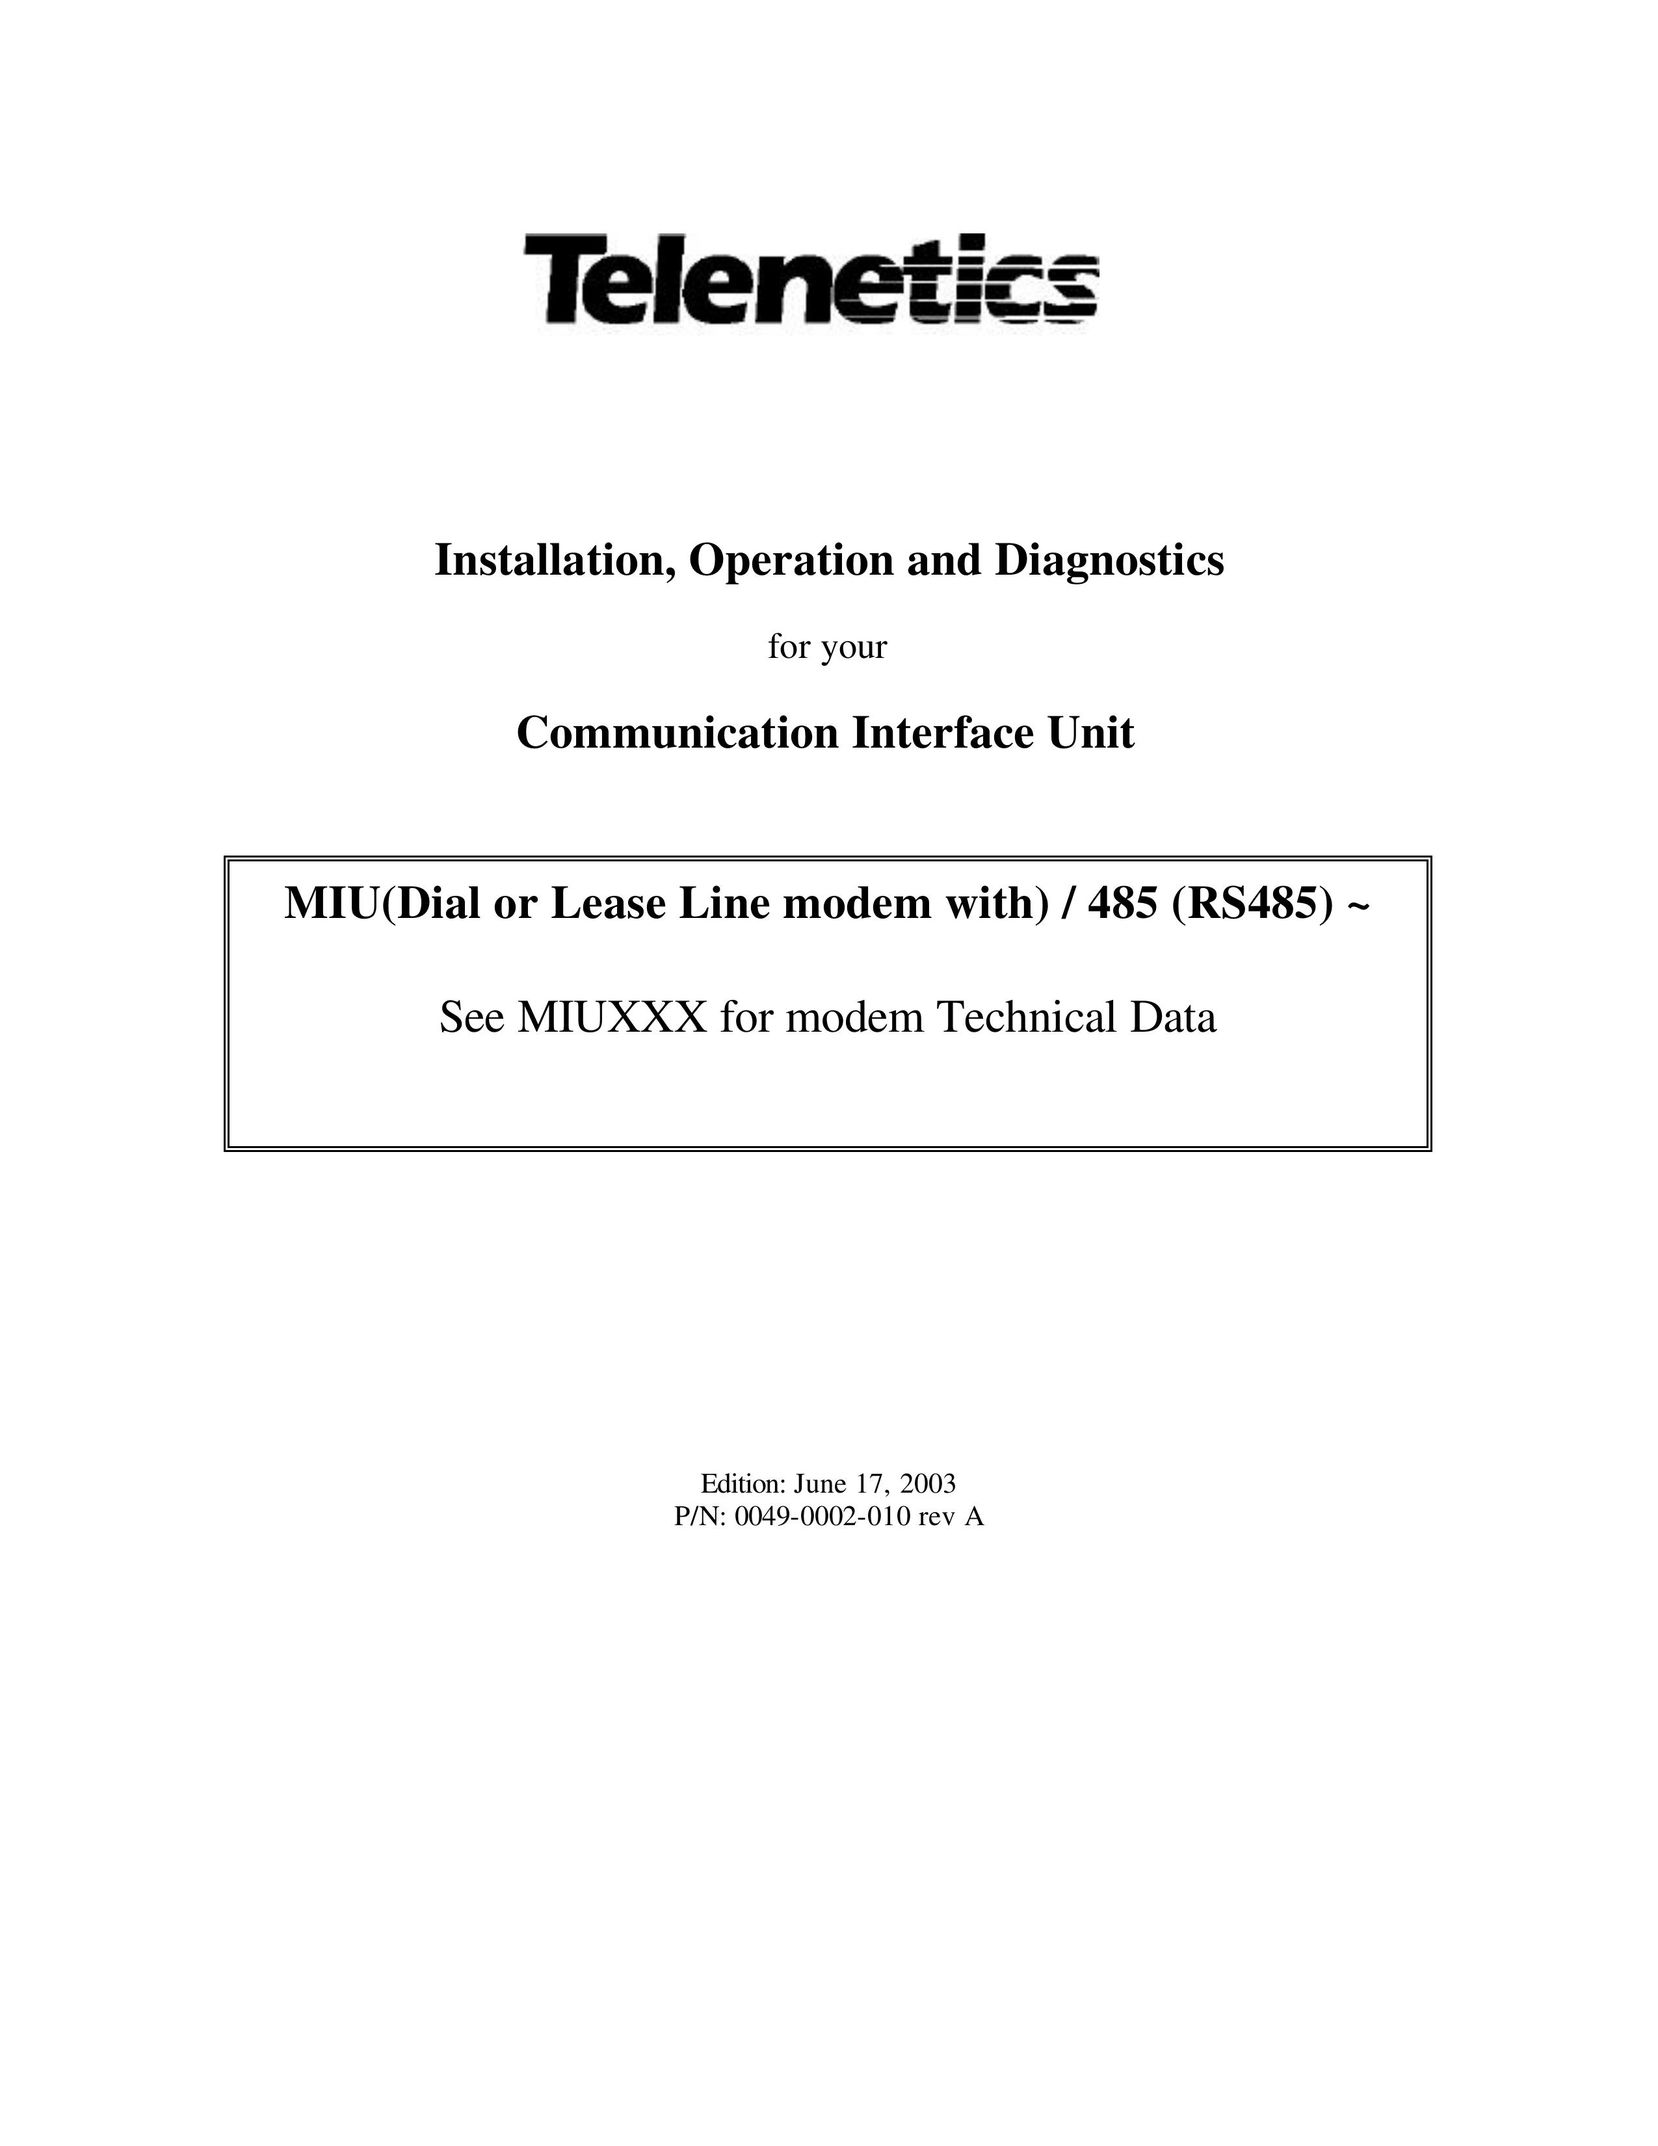 Telenetics MIU Dial or Leased Line modem with RS-485 Network Card User Manual